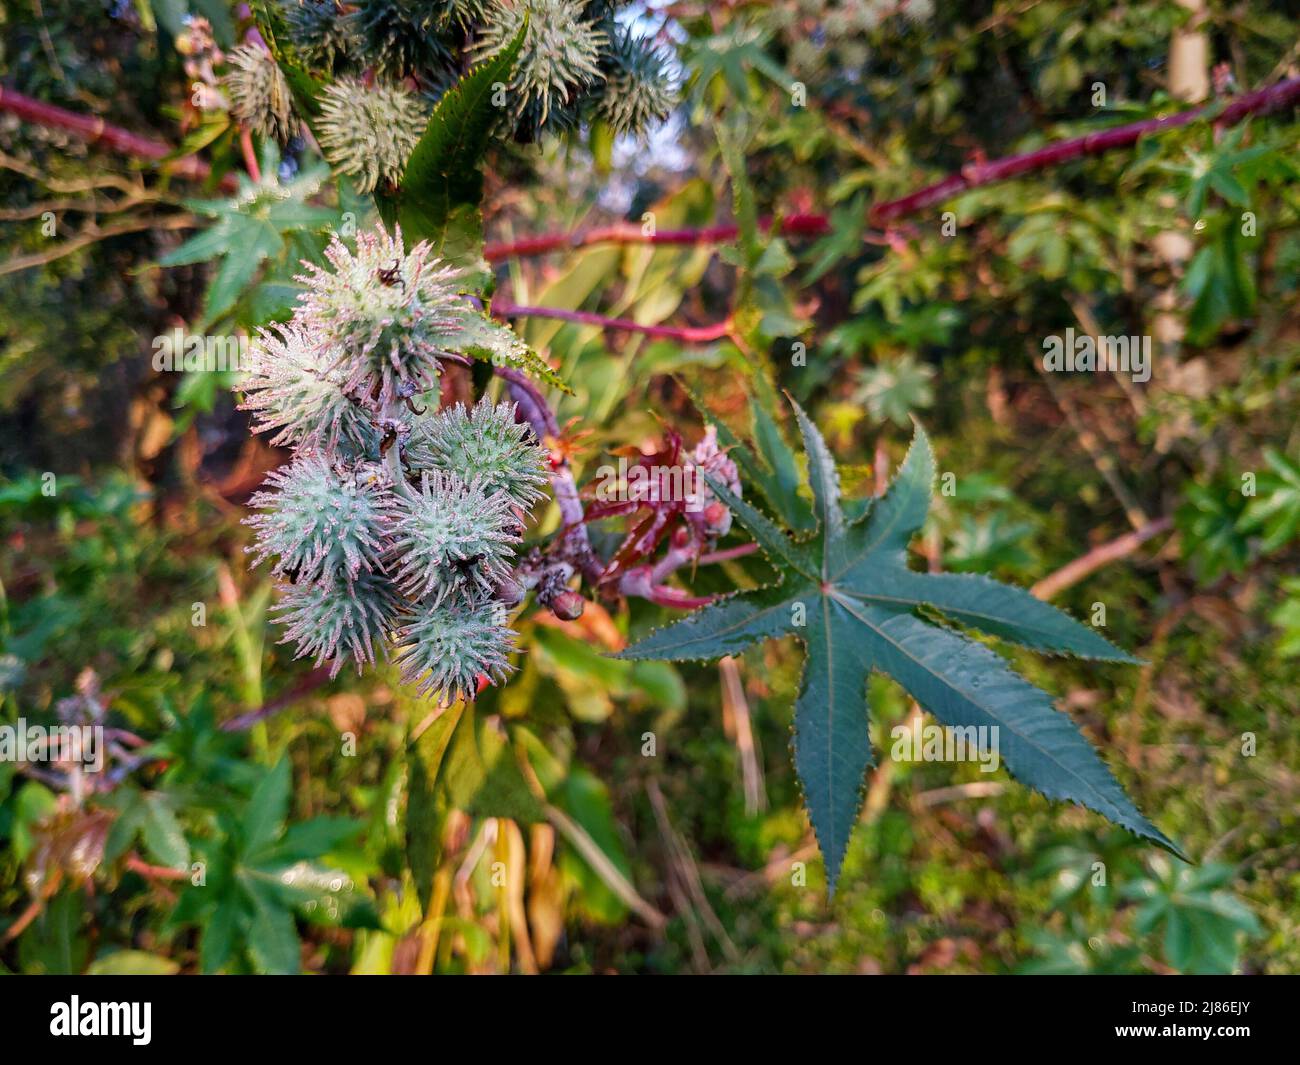 Closeup shot of Castor oil plant leaf and seeds. Ricinus communis, the castor bean or castor oil plant, is a species of perennial flowering plant in t Stock Photo